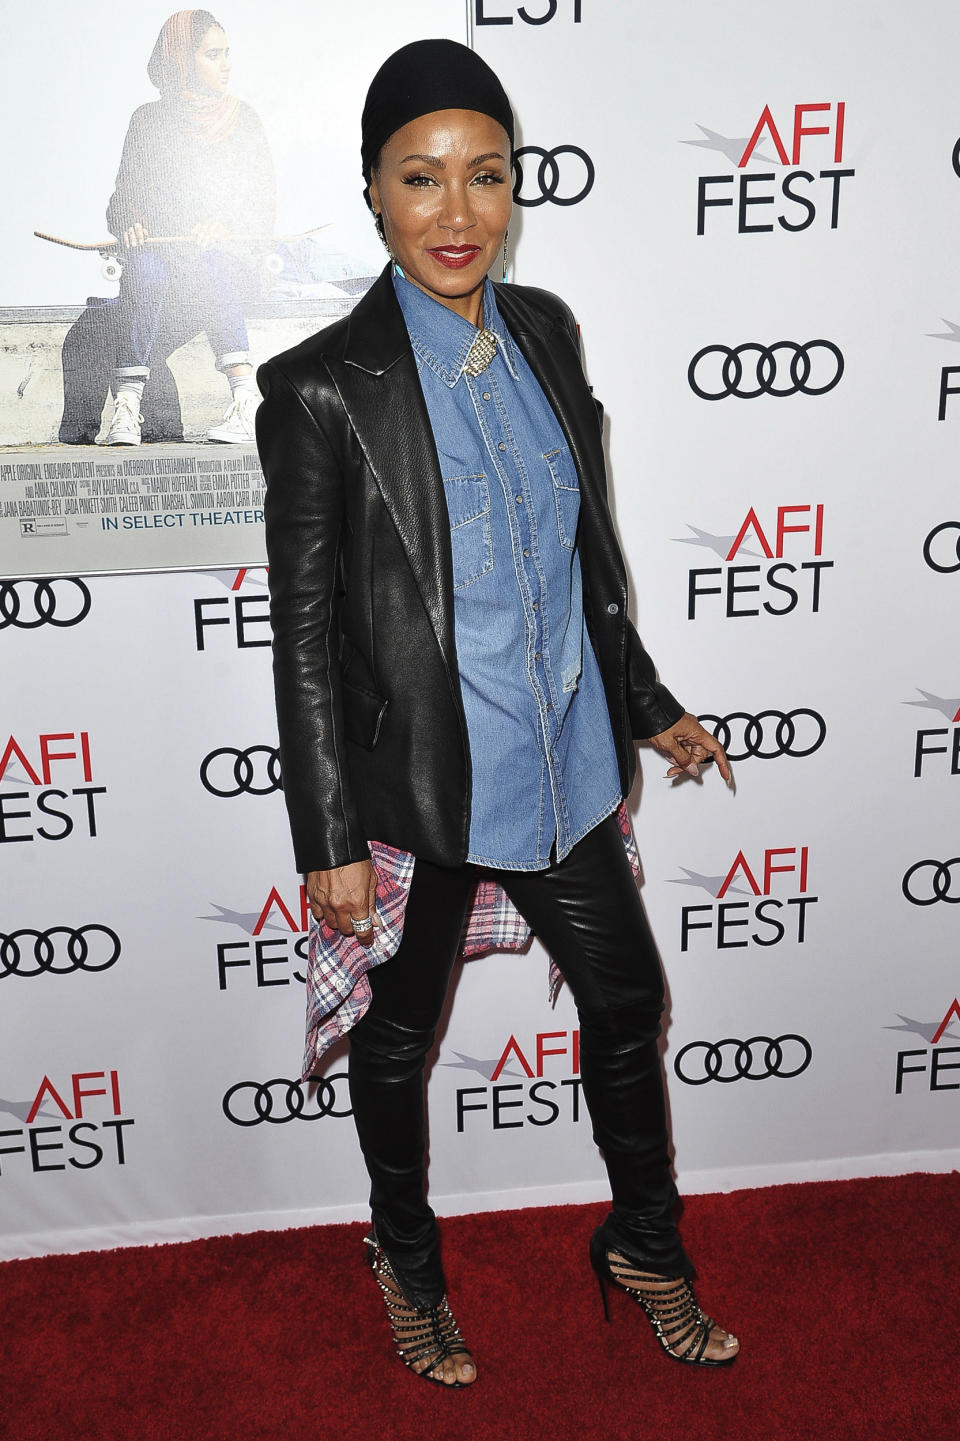 Jada Pinkett Smith attends 2019 AFI Fest - "Hala," at the TCL Chinese Theatre, Monday, Nov. 18, 2019, in Los Angeles. (Photo by Richard Shotwell/Invision/AP)